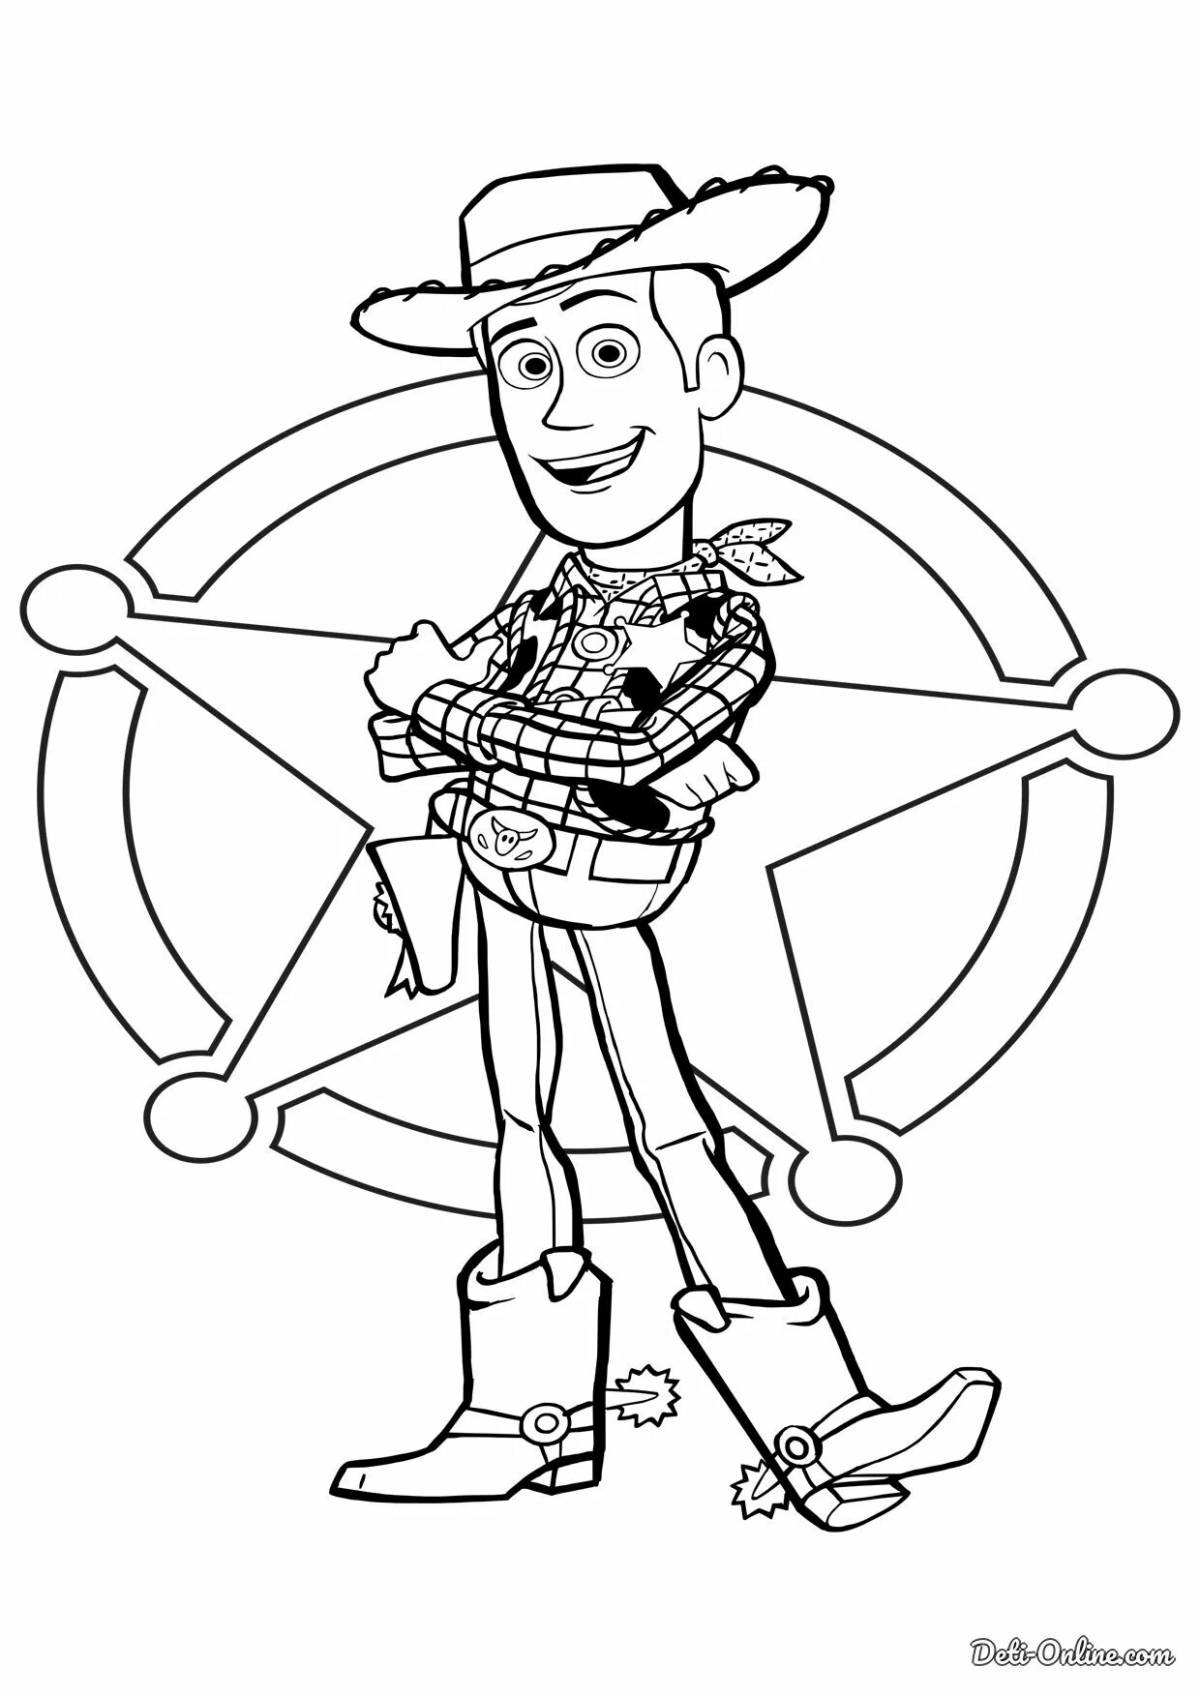 Color fun andy coloring page